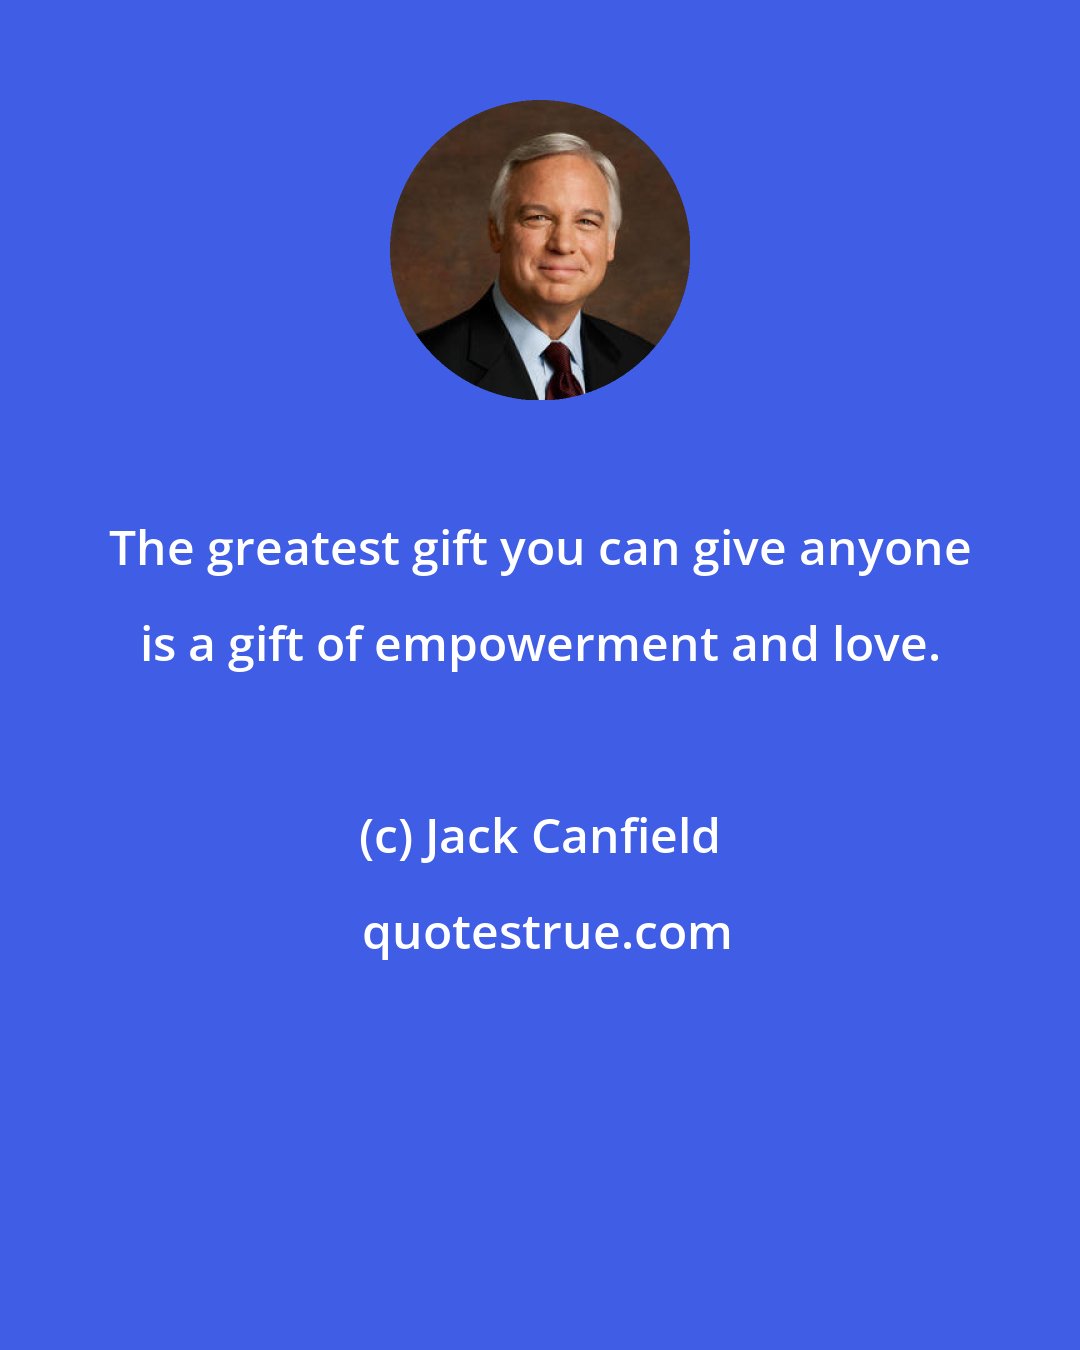 Jack Canfield: The greatest gift you can give anyone is a gift of empowerment and love.